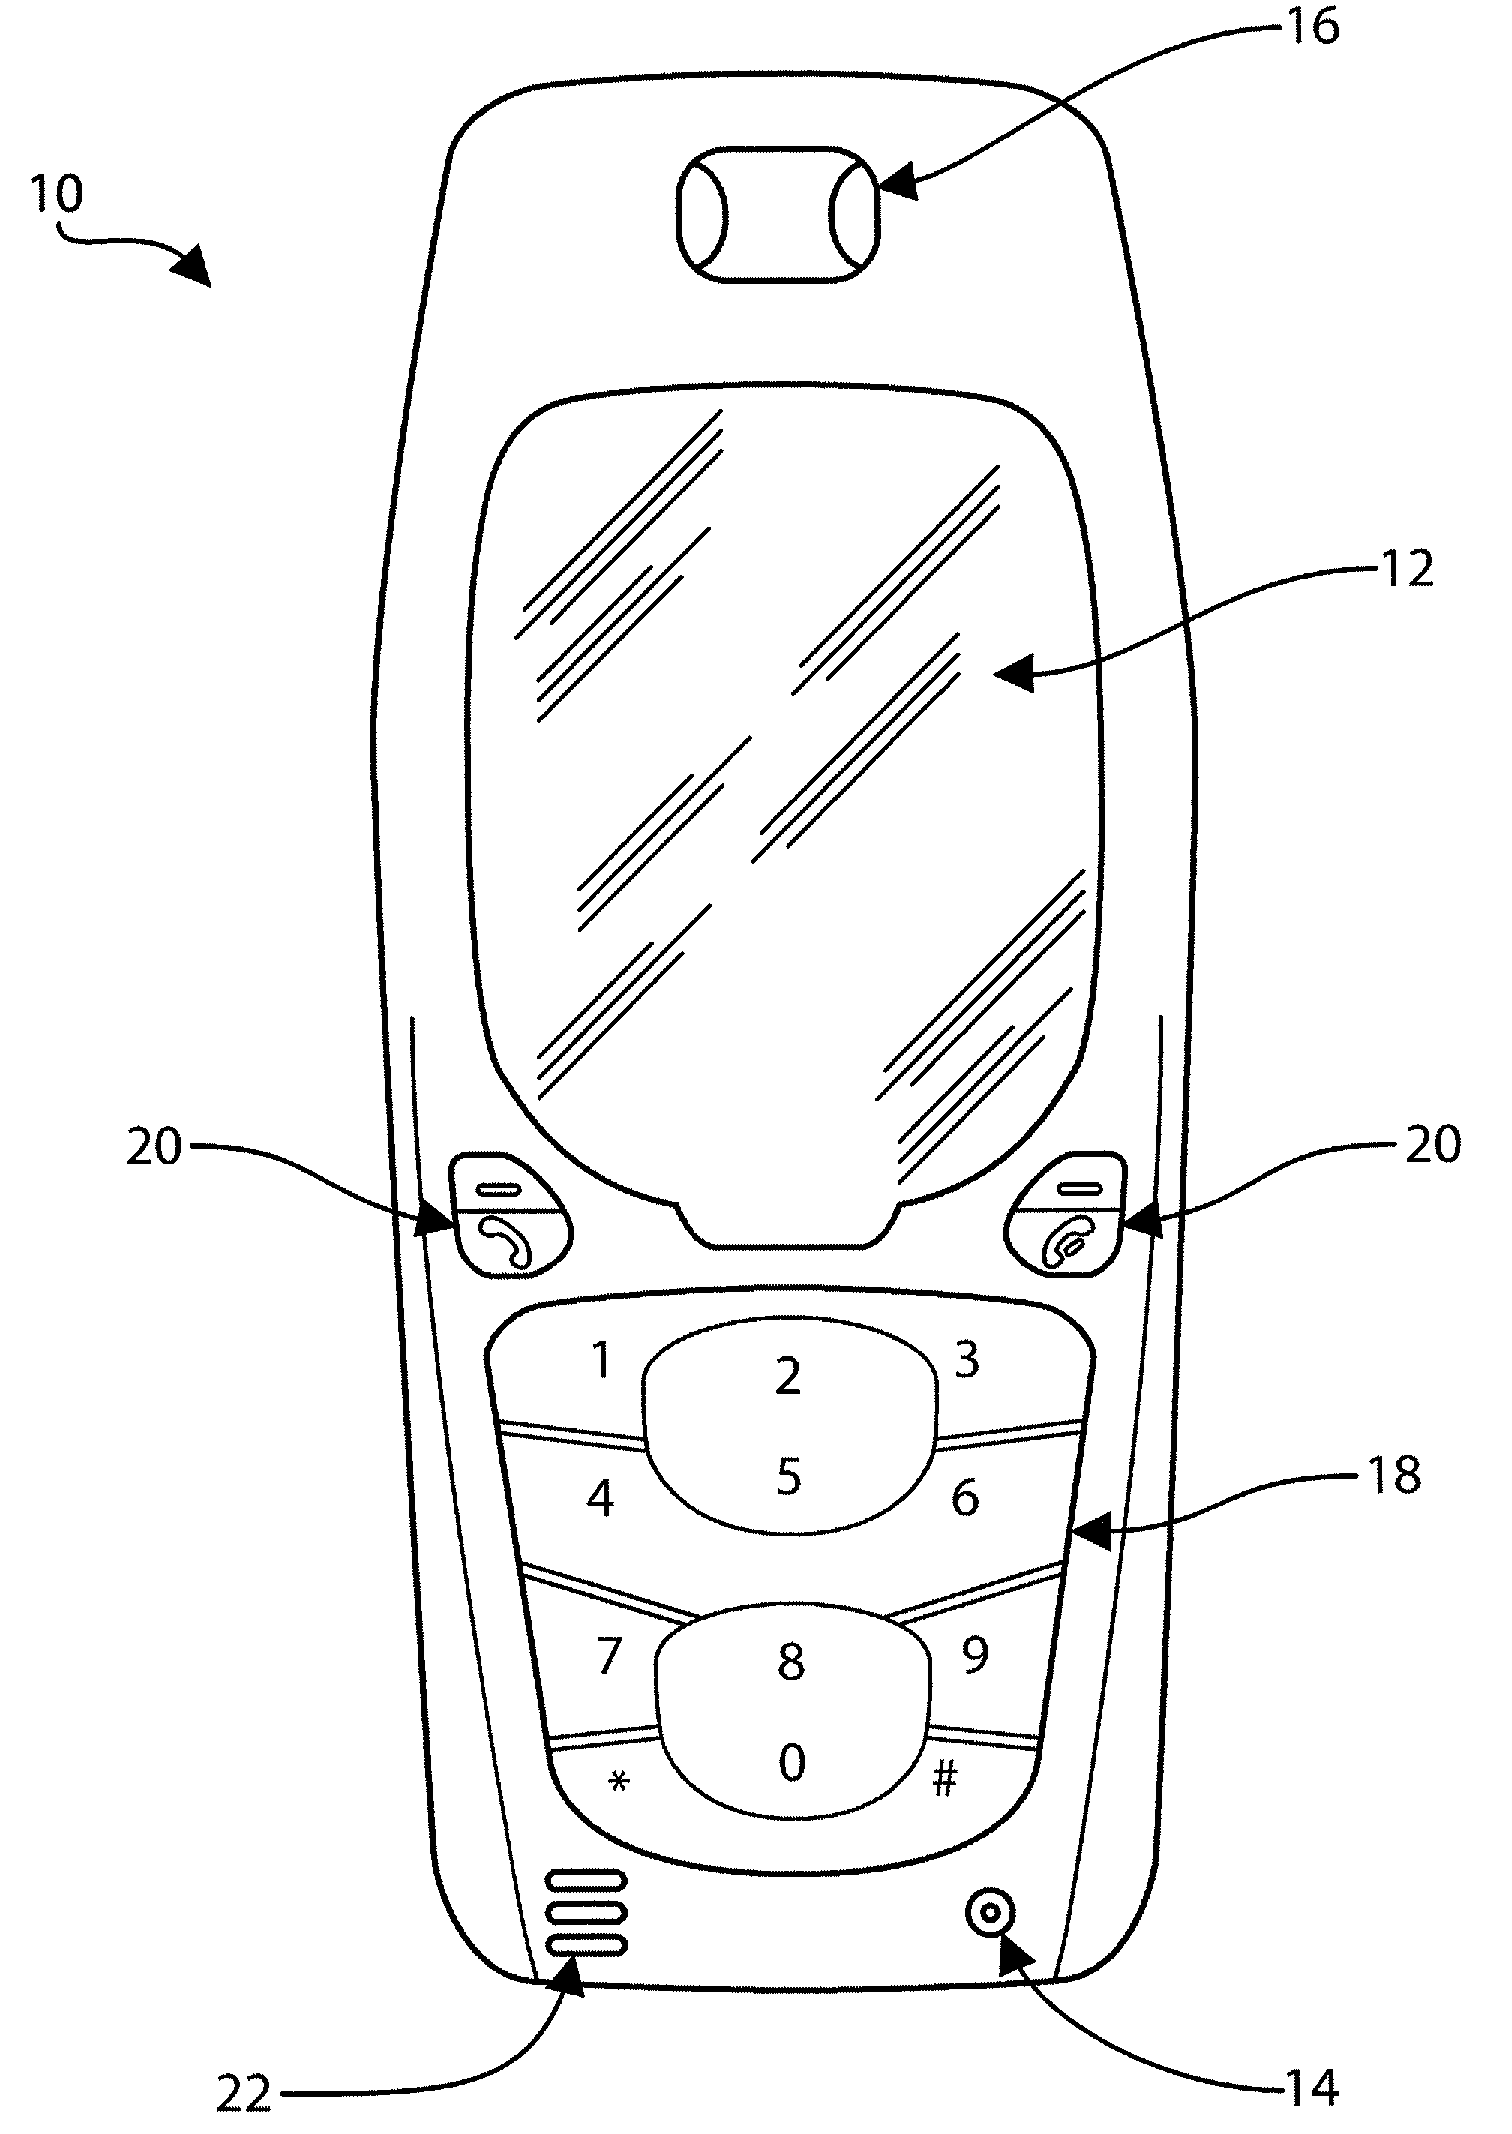 Cell phone with breath analyzer